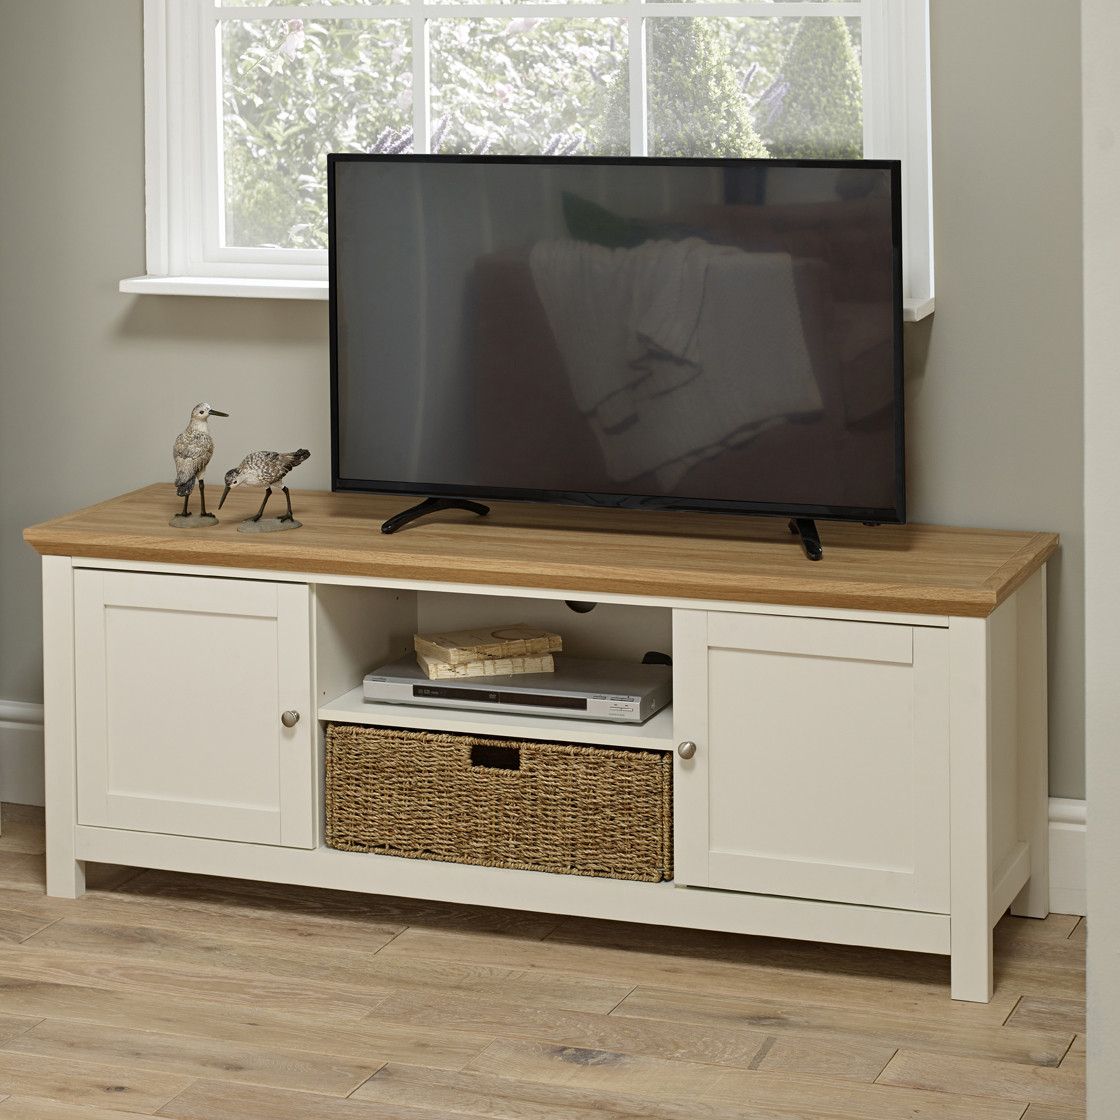 Cotsowold Tv Unit Cream – Tv & Media Units – Living Room Inside Tv Units With Storage (View 5 of 15)